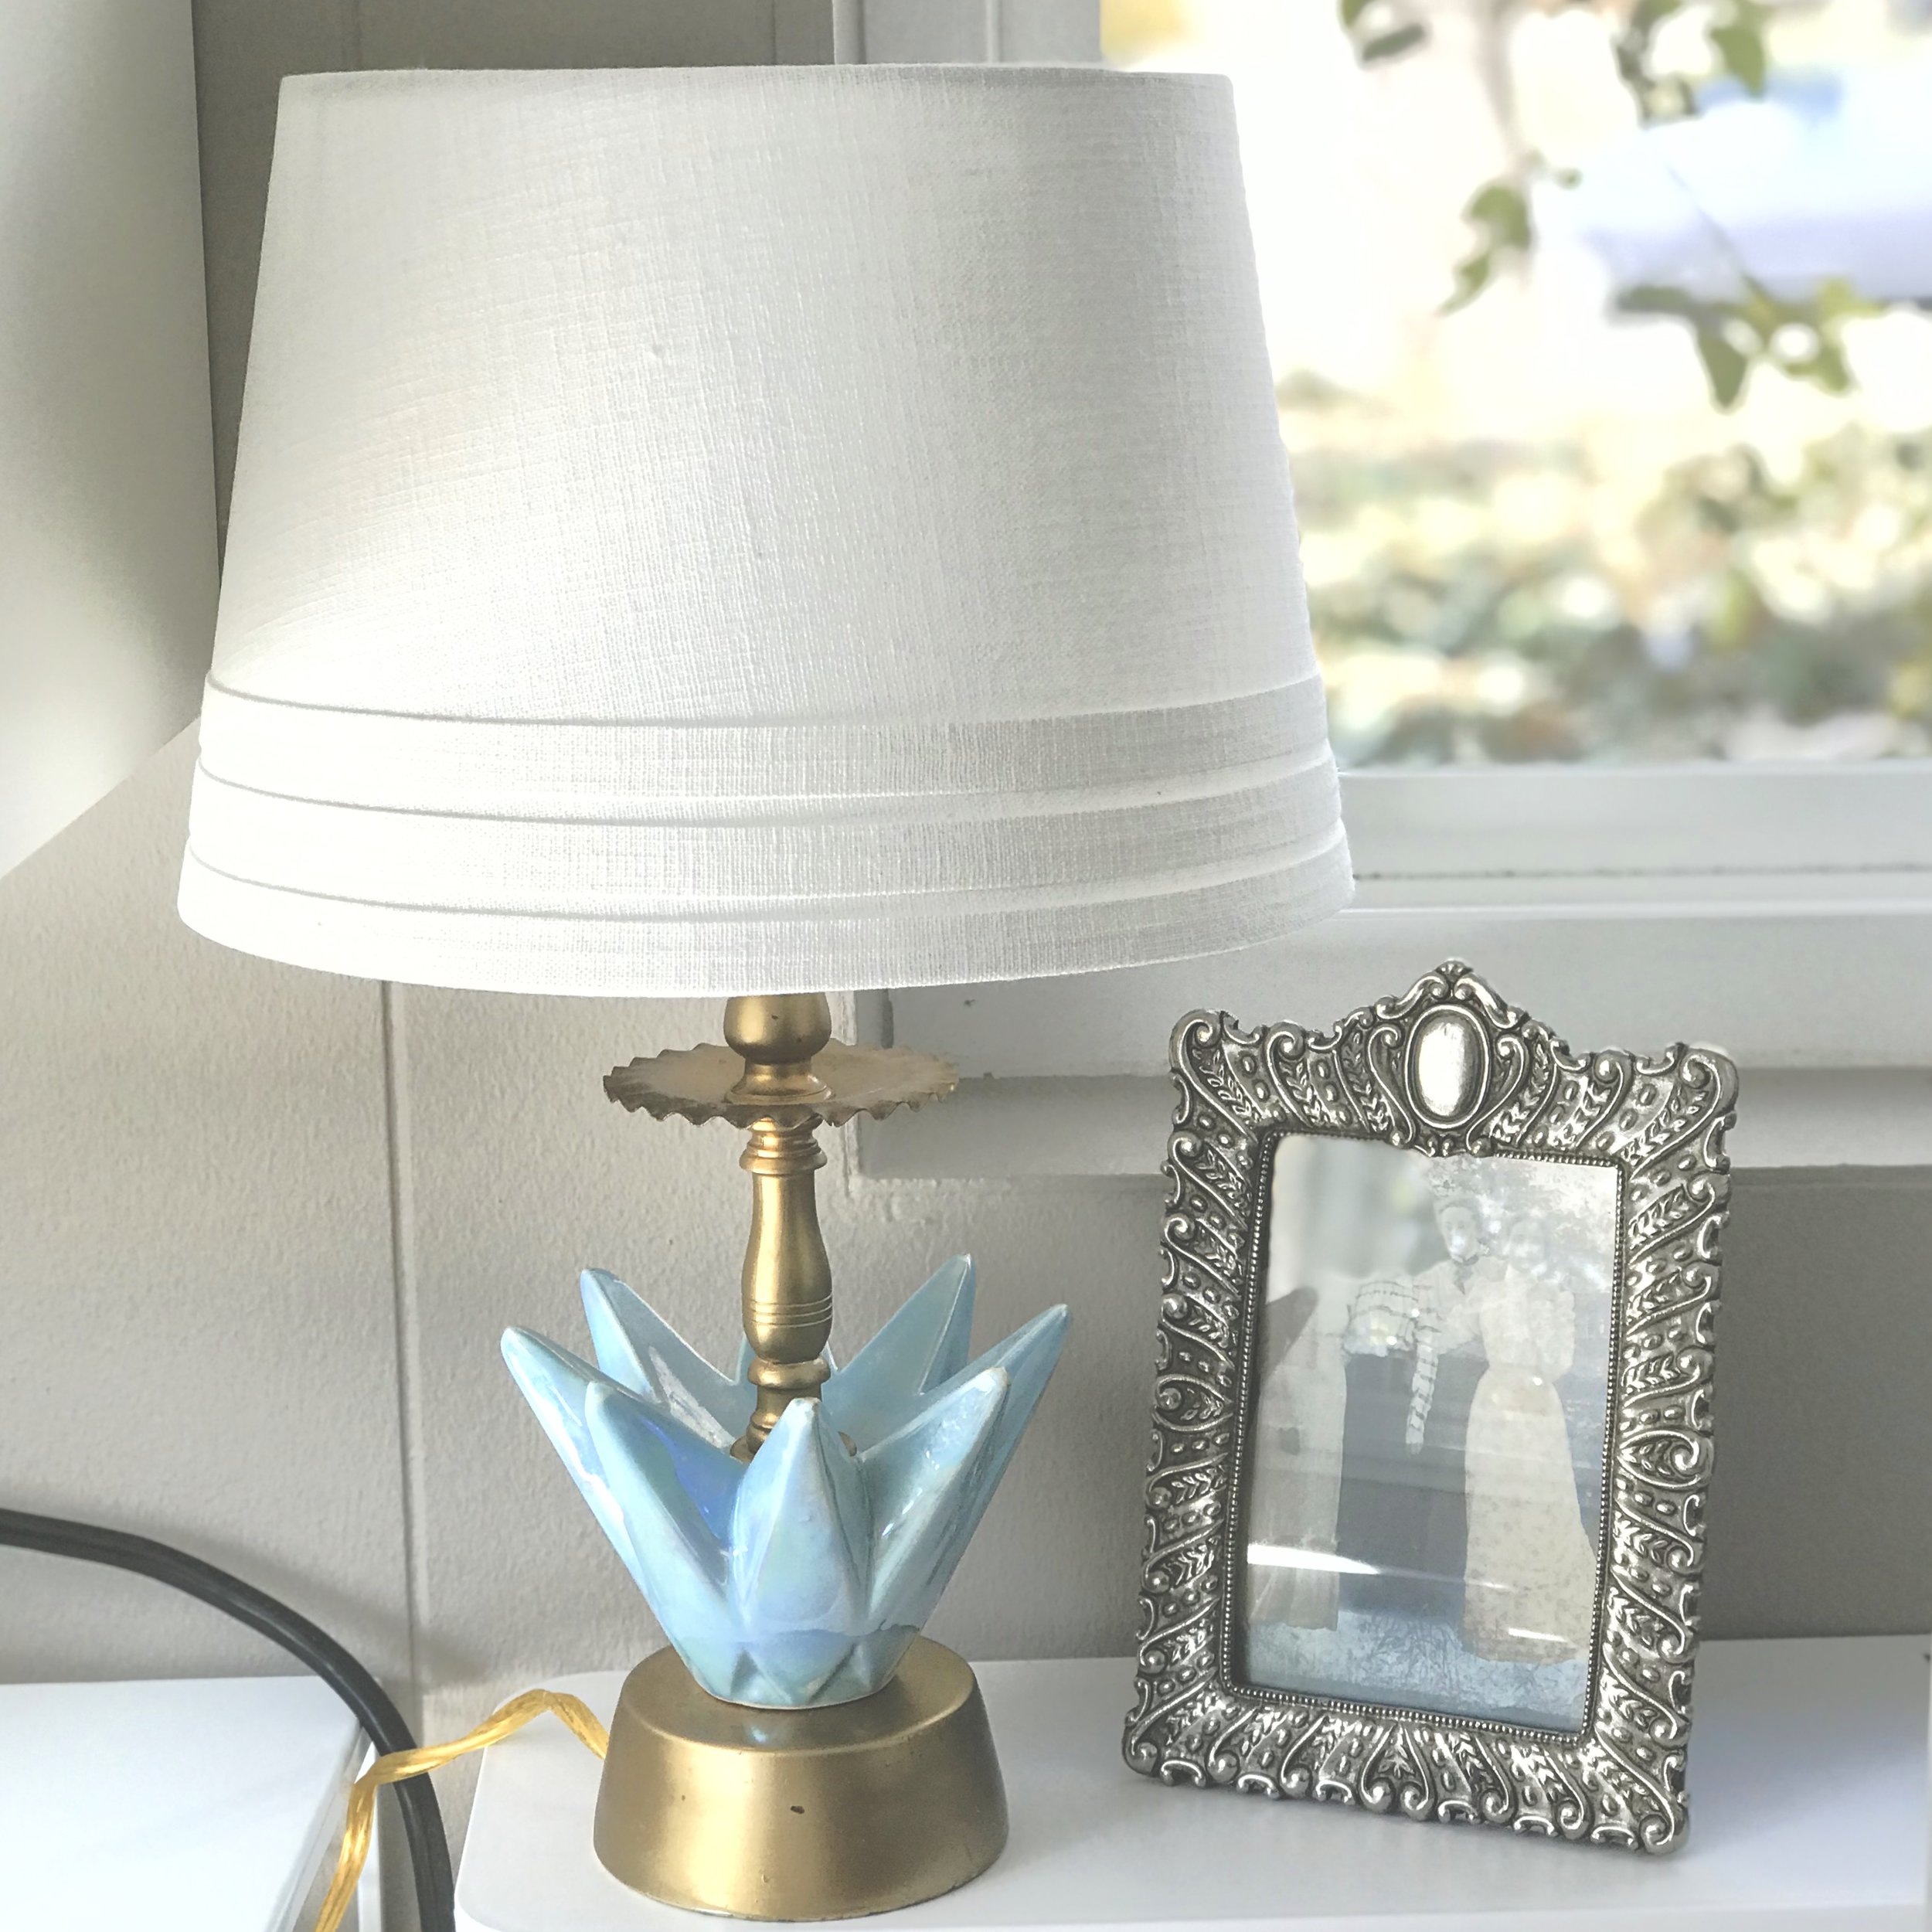 How To Make A Lamp Shade Ring Fit, How To Fit A Clip On Lampshade